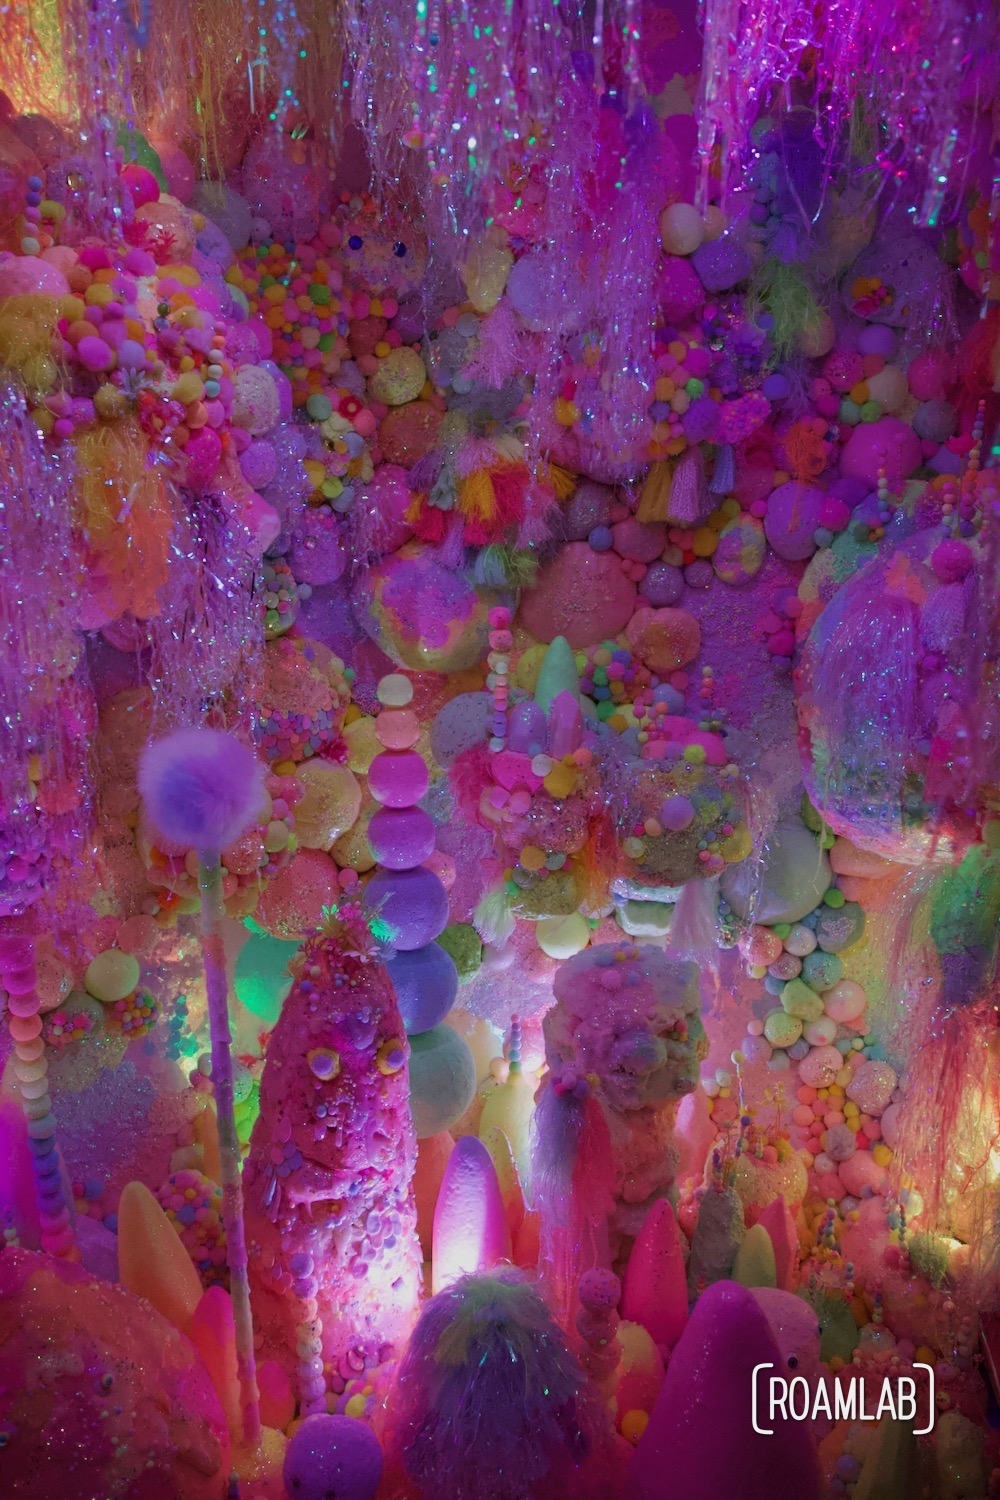 A colorful display that both looks like candy, smells like candy, but is not candy at the  House of Eternal Return, Meow Wolf's Santa Fe, New Mexico Location